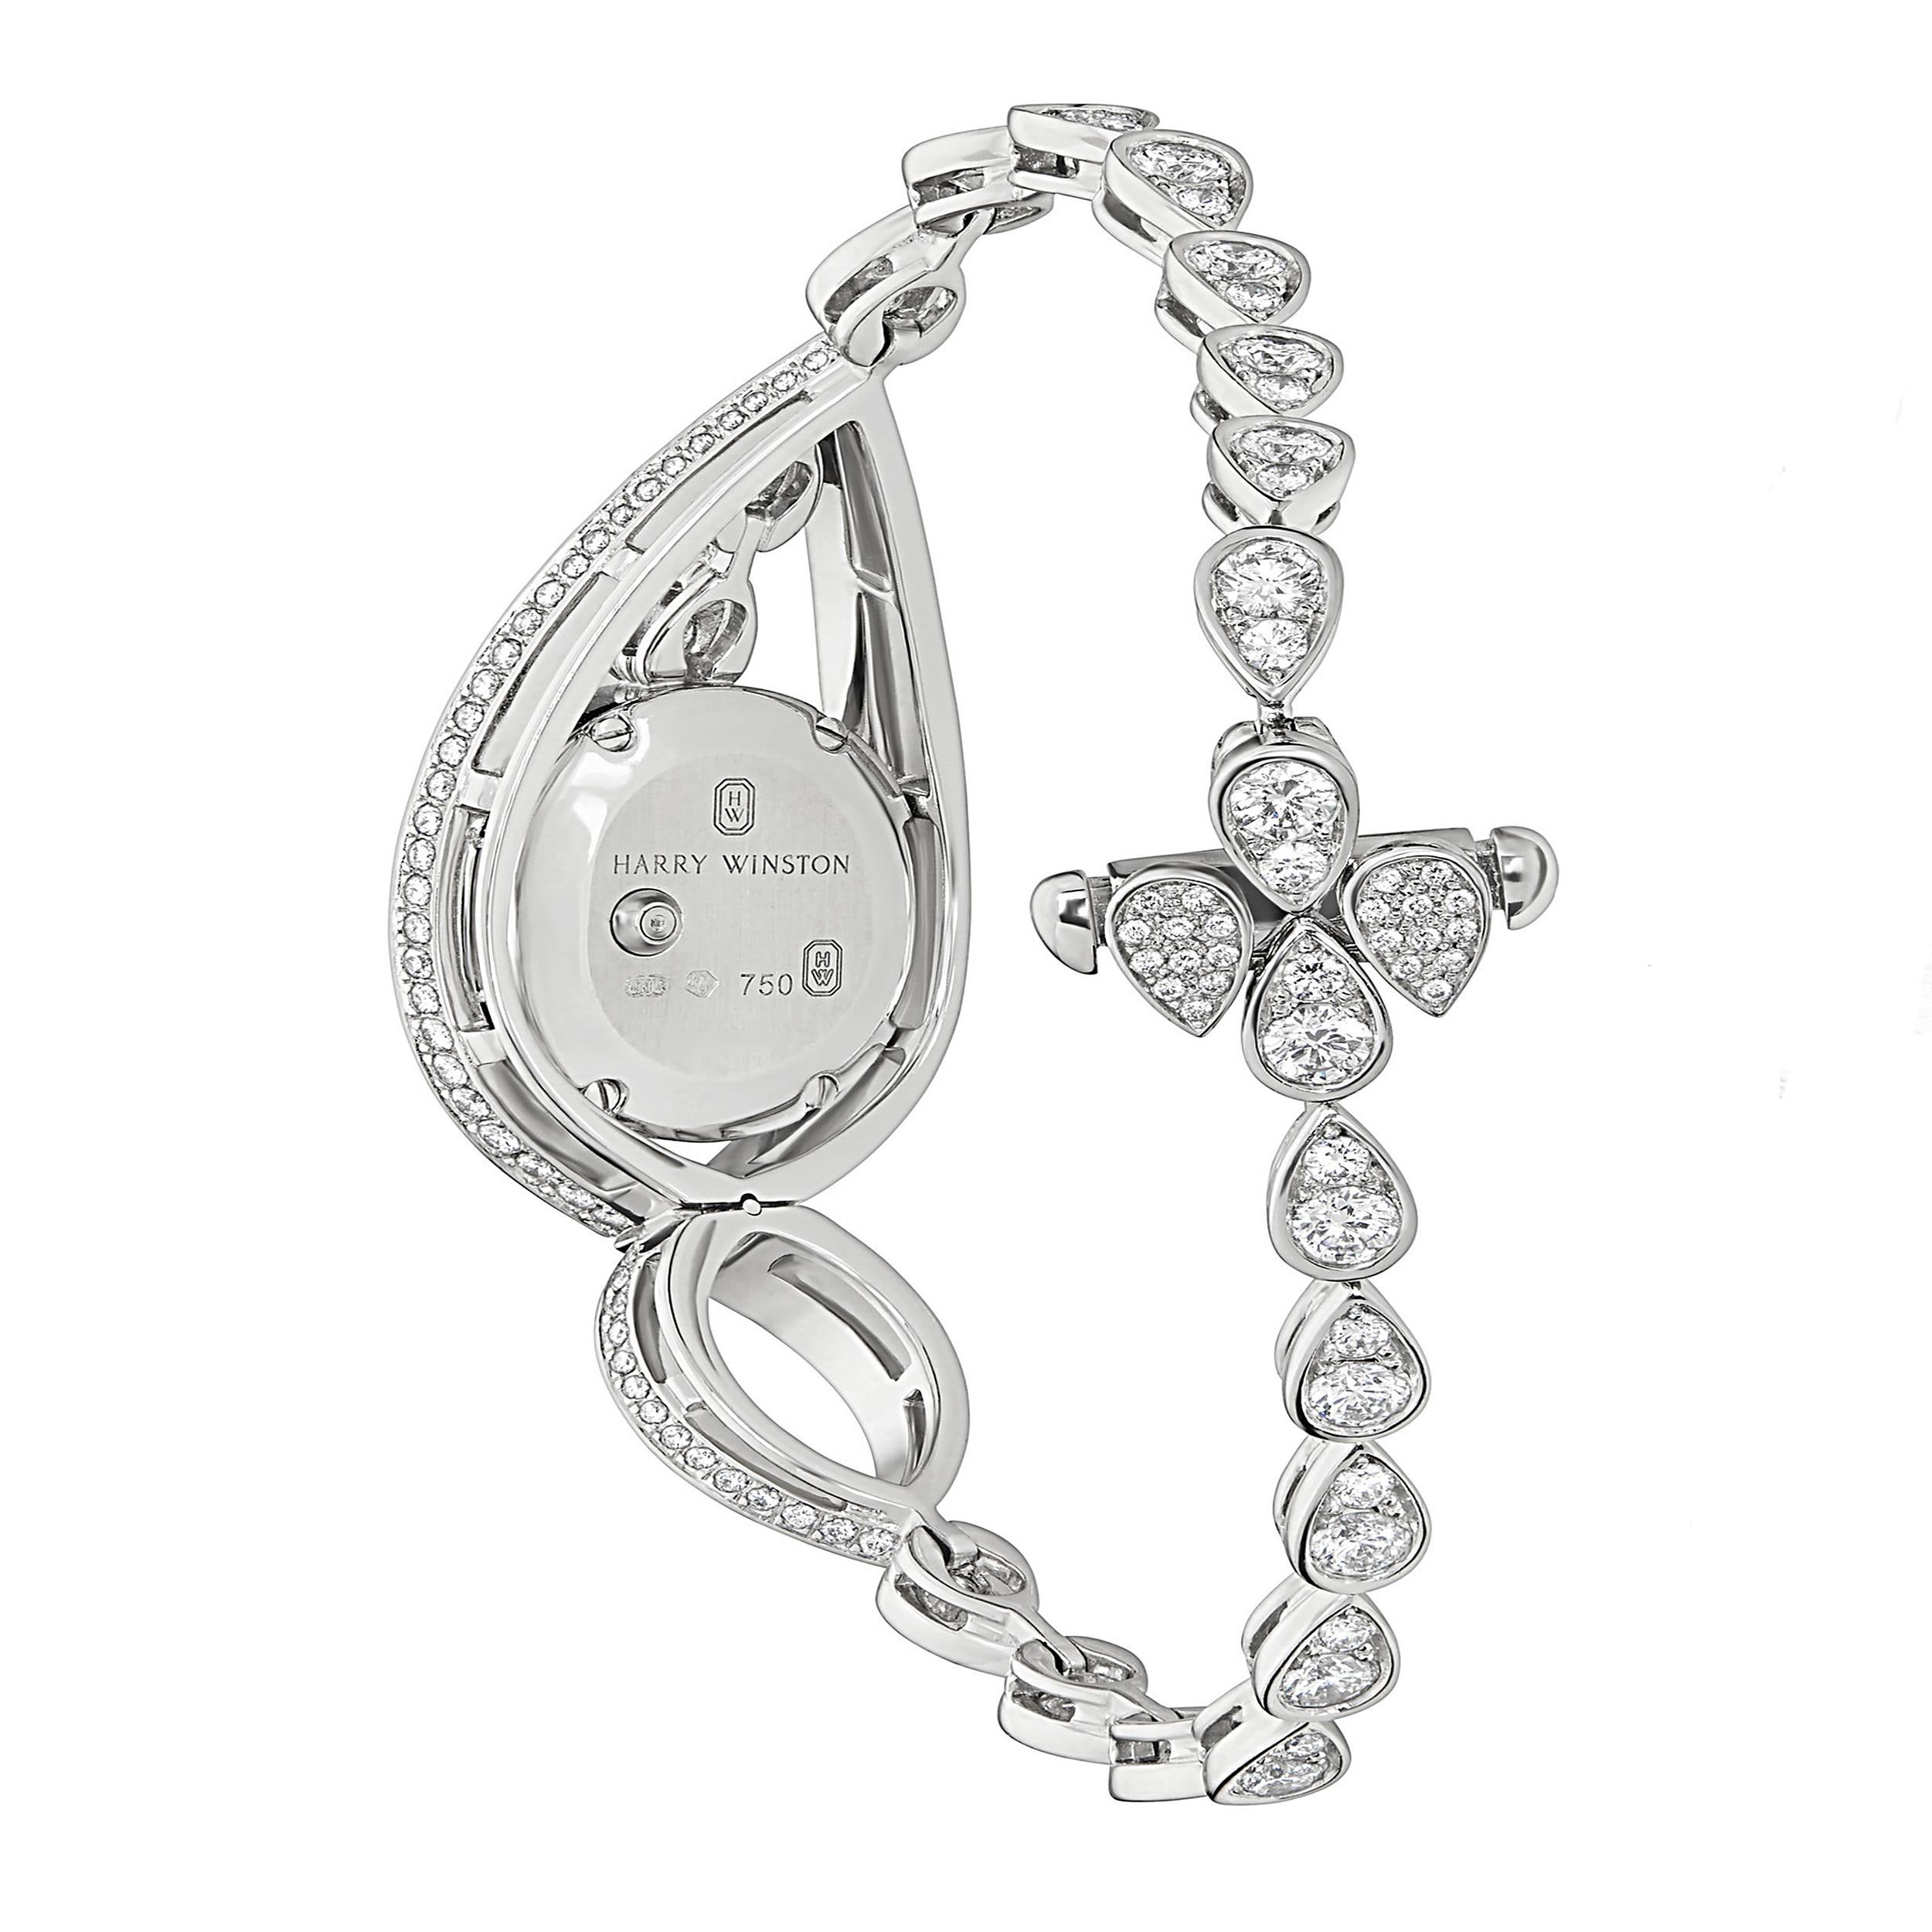 The Harry Winston Diamond White Gold Watch from the Loop Collection is a luxurious and meticulously crafted timepiece. The watch case and bracelet are made from 18k white gold, offering a sleek and radiant finish. What sets this watch apart is its